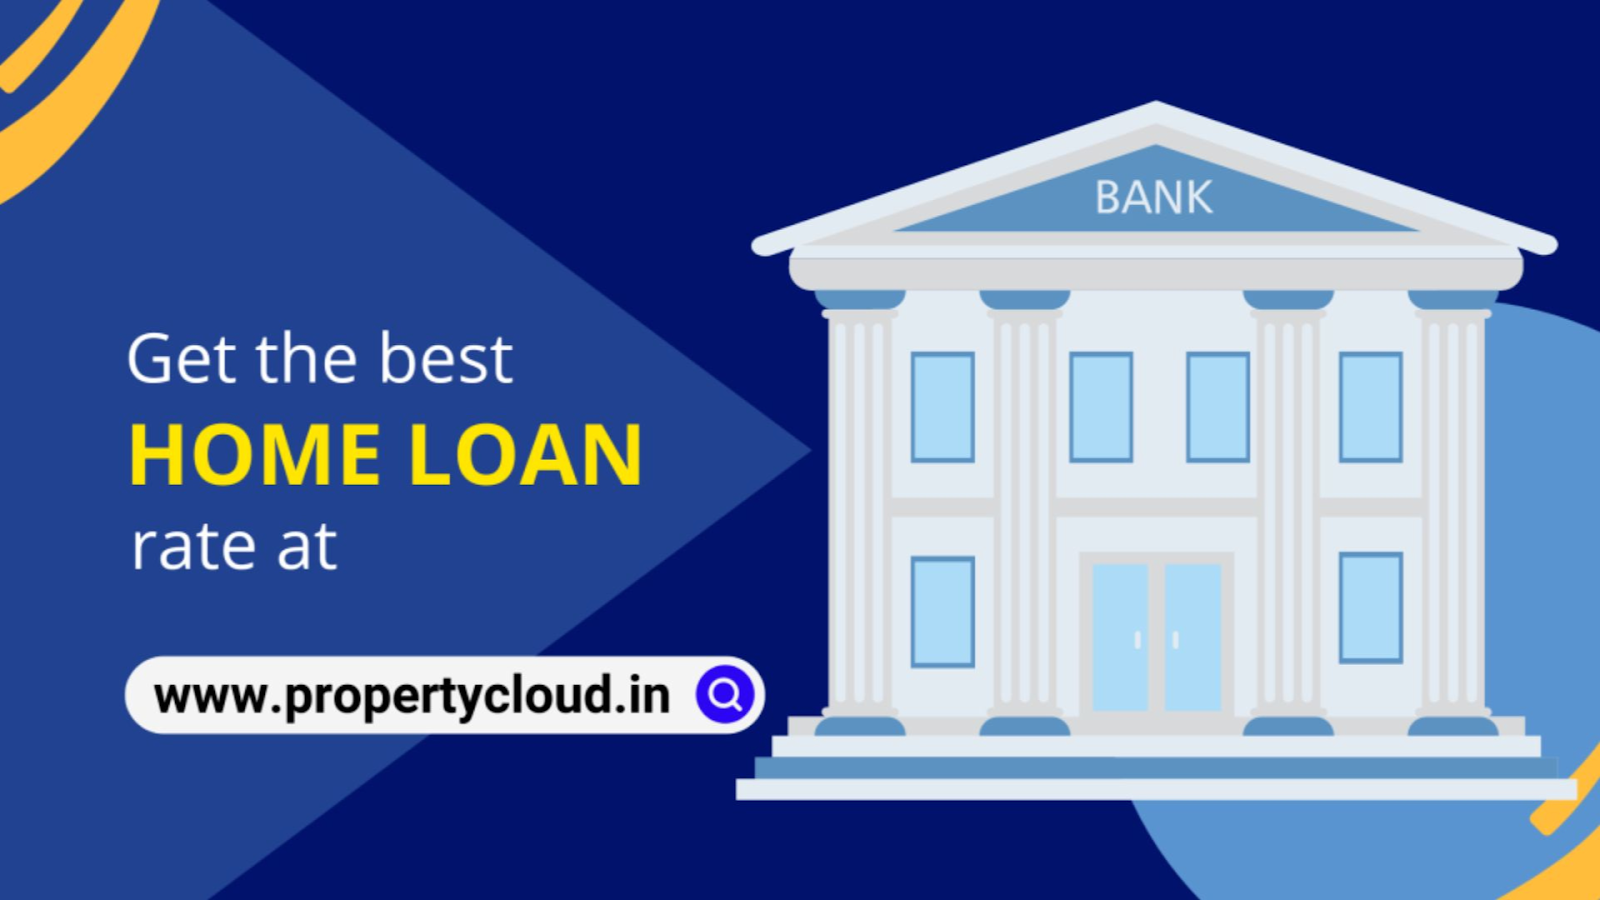 Contact PropertyCloud, to get the best home loans at the best rate of interest.